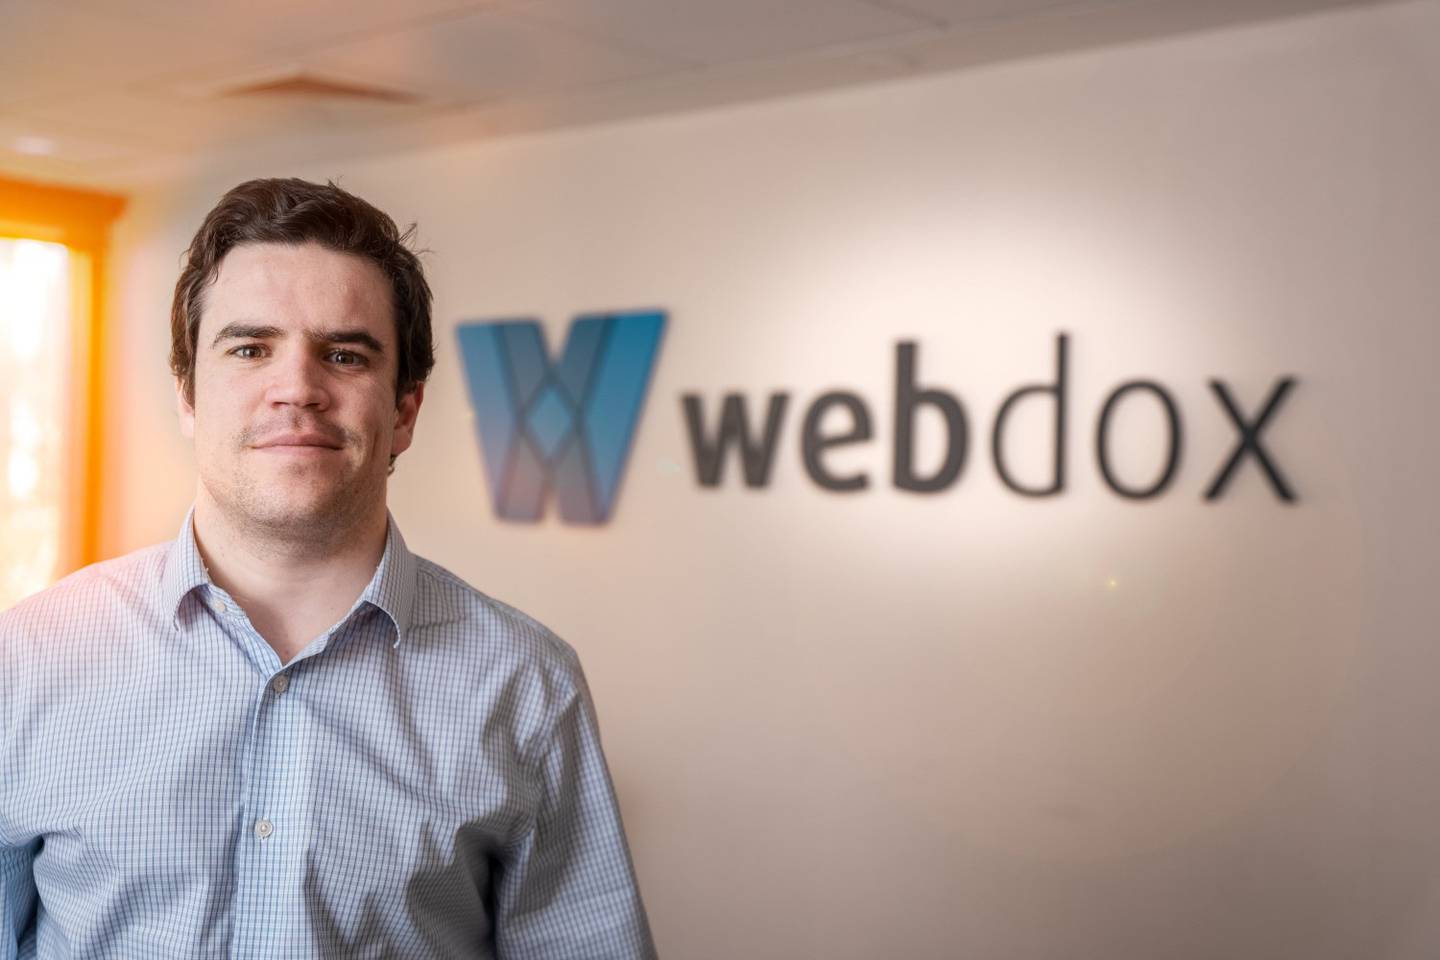 Webdox raised 7.3 million in its bet for LatAm